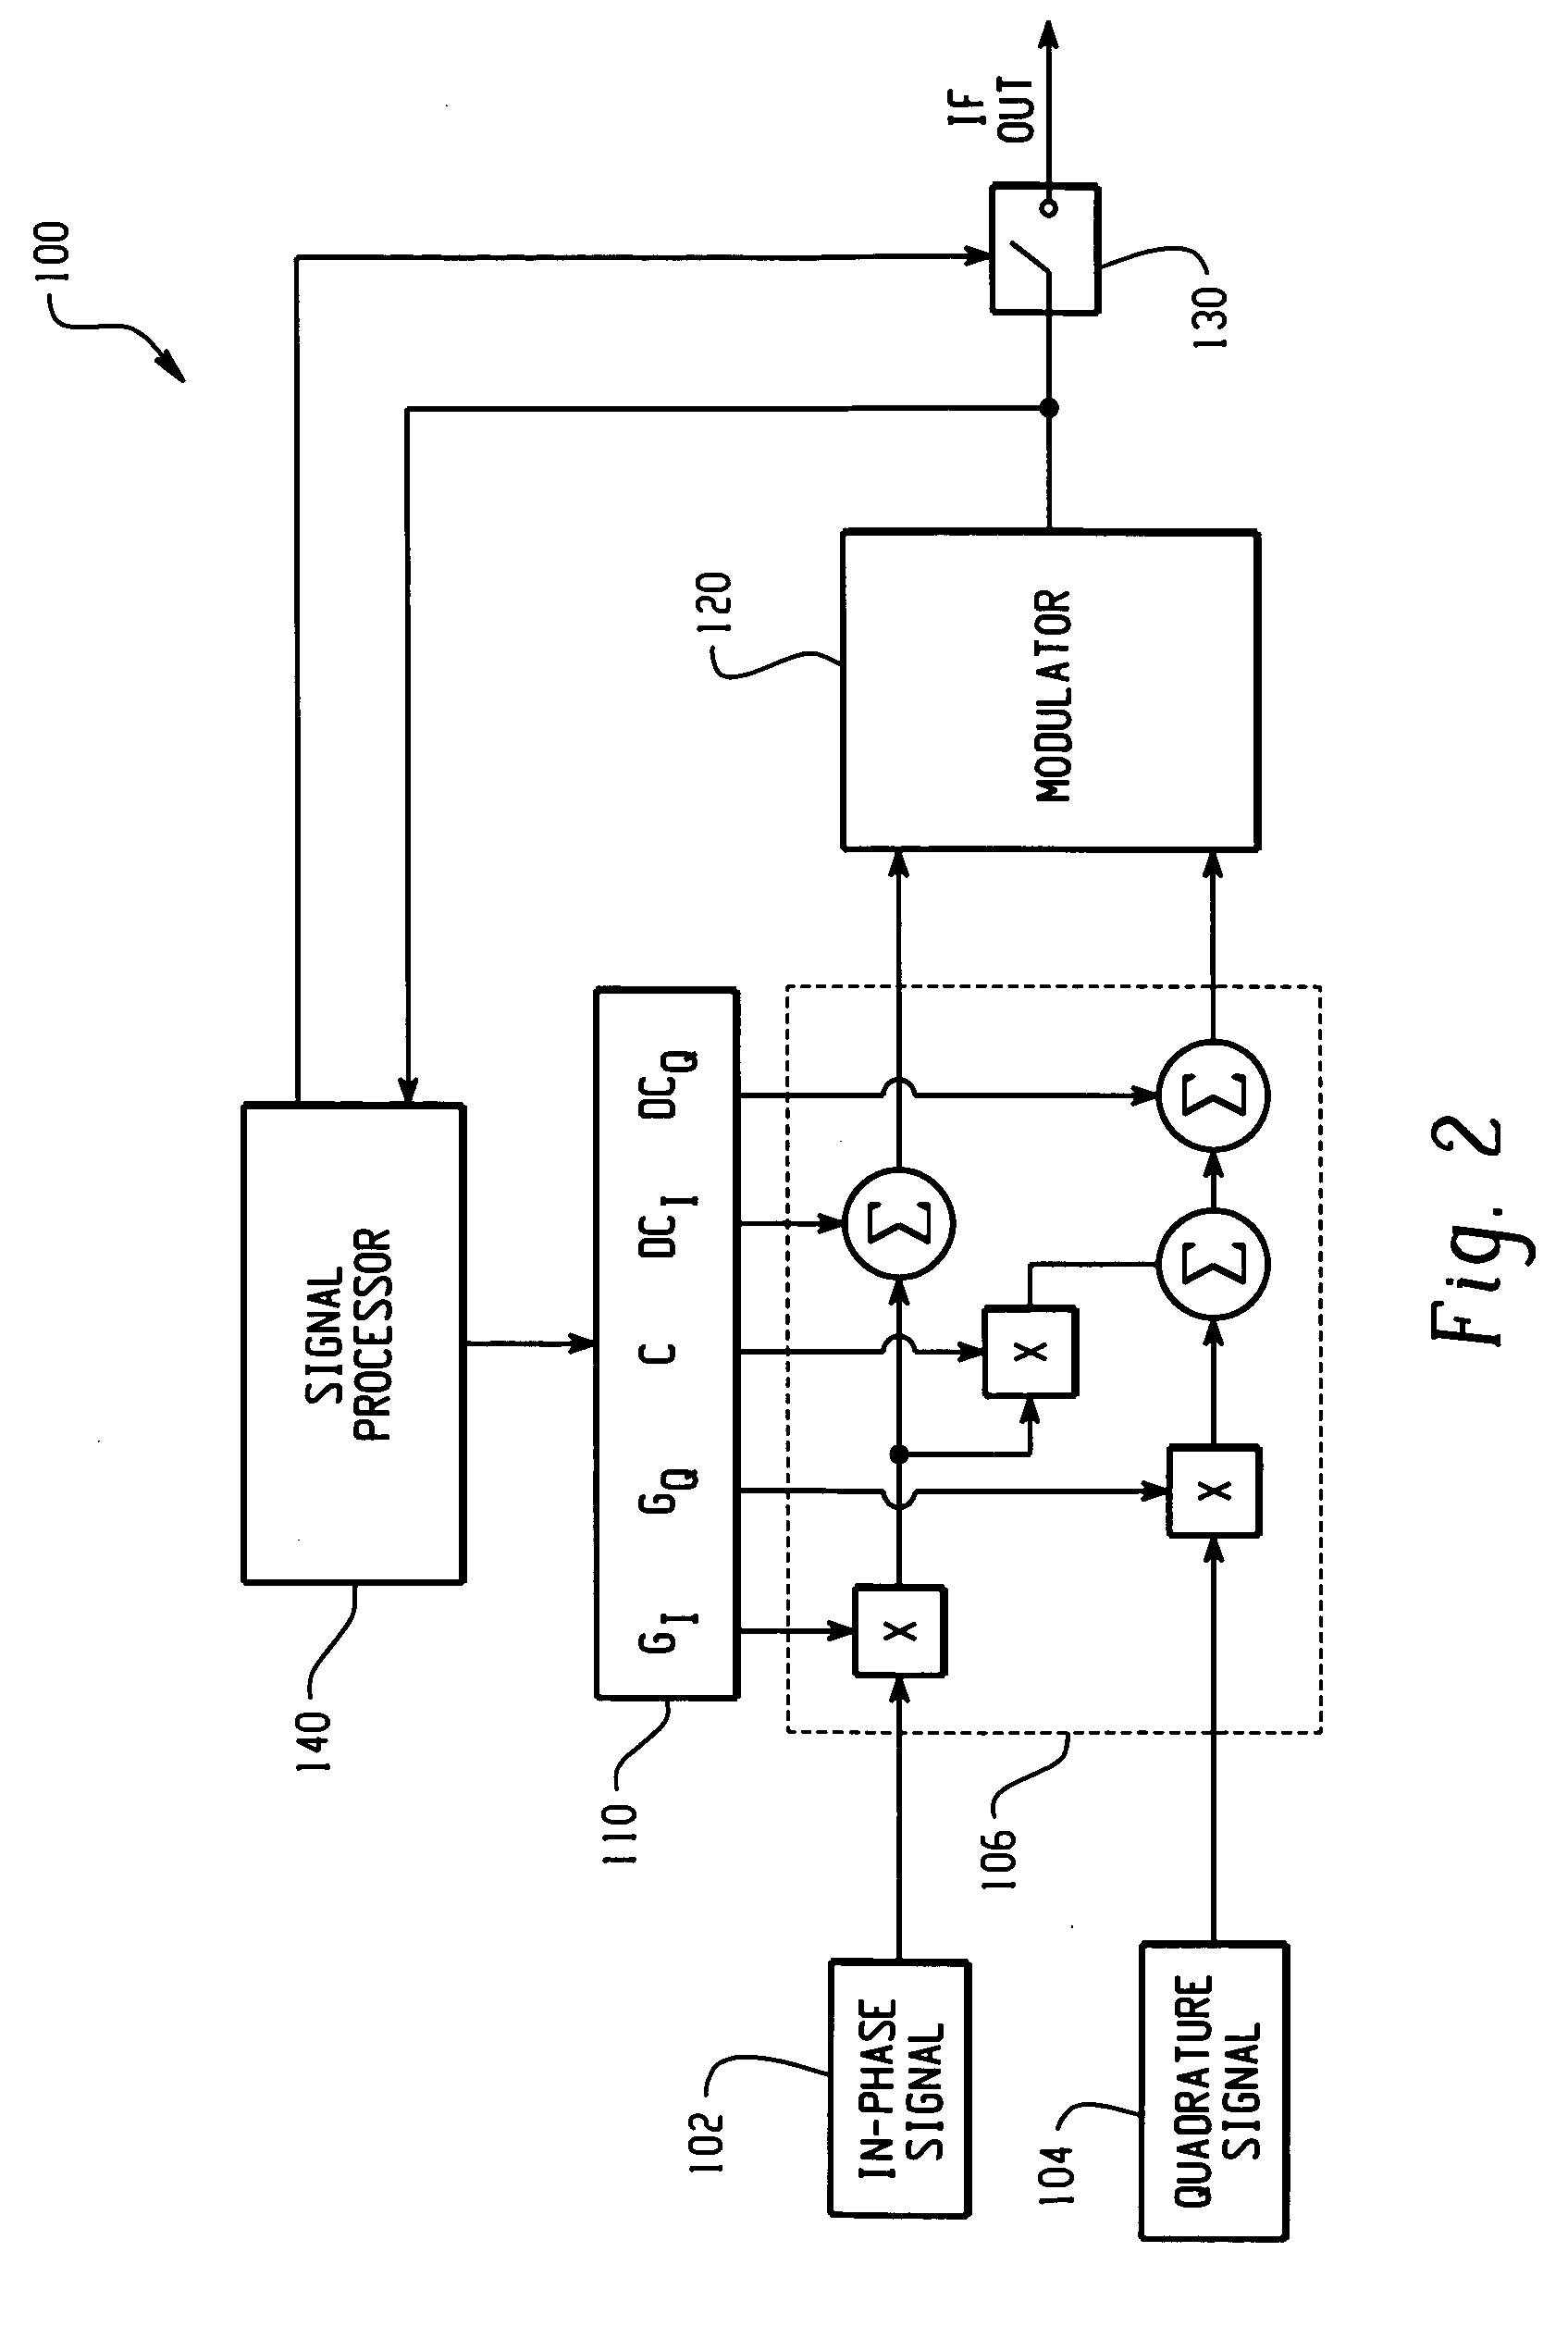 Residual carrier and side band processing system and method